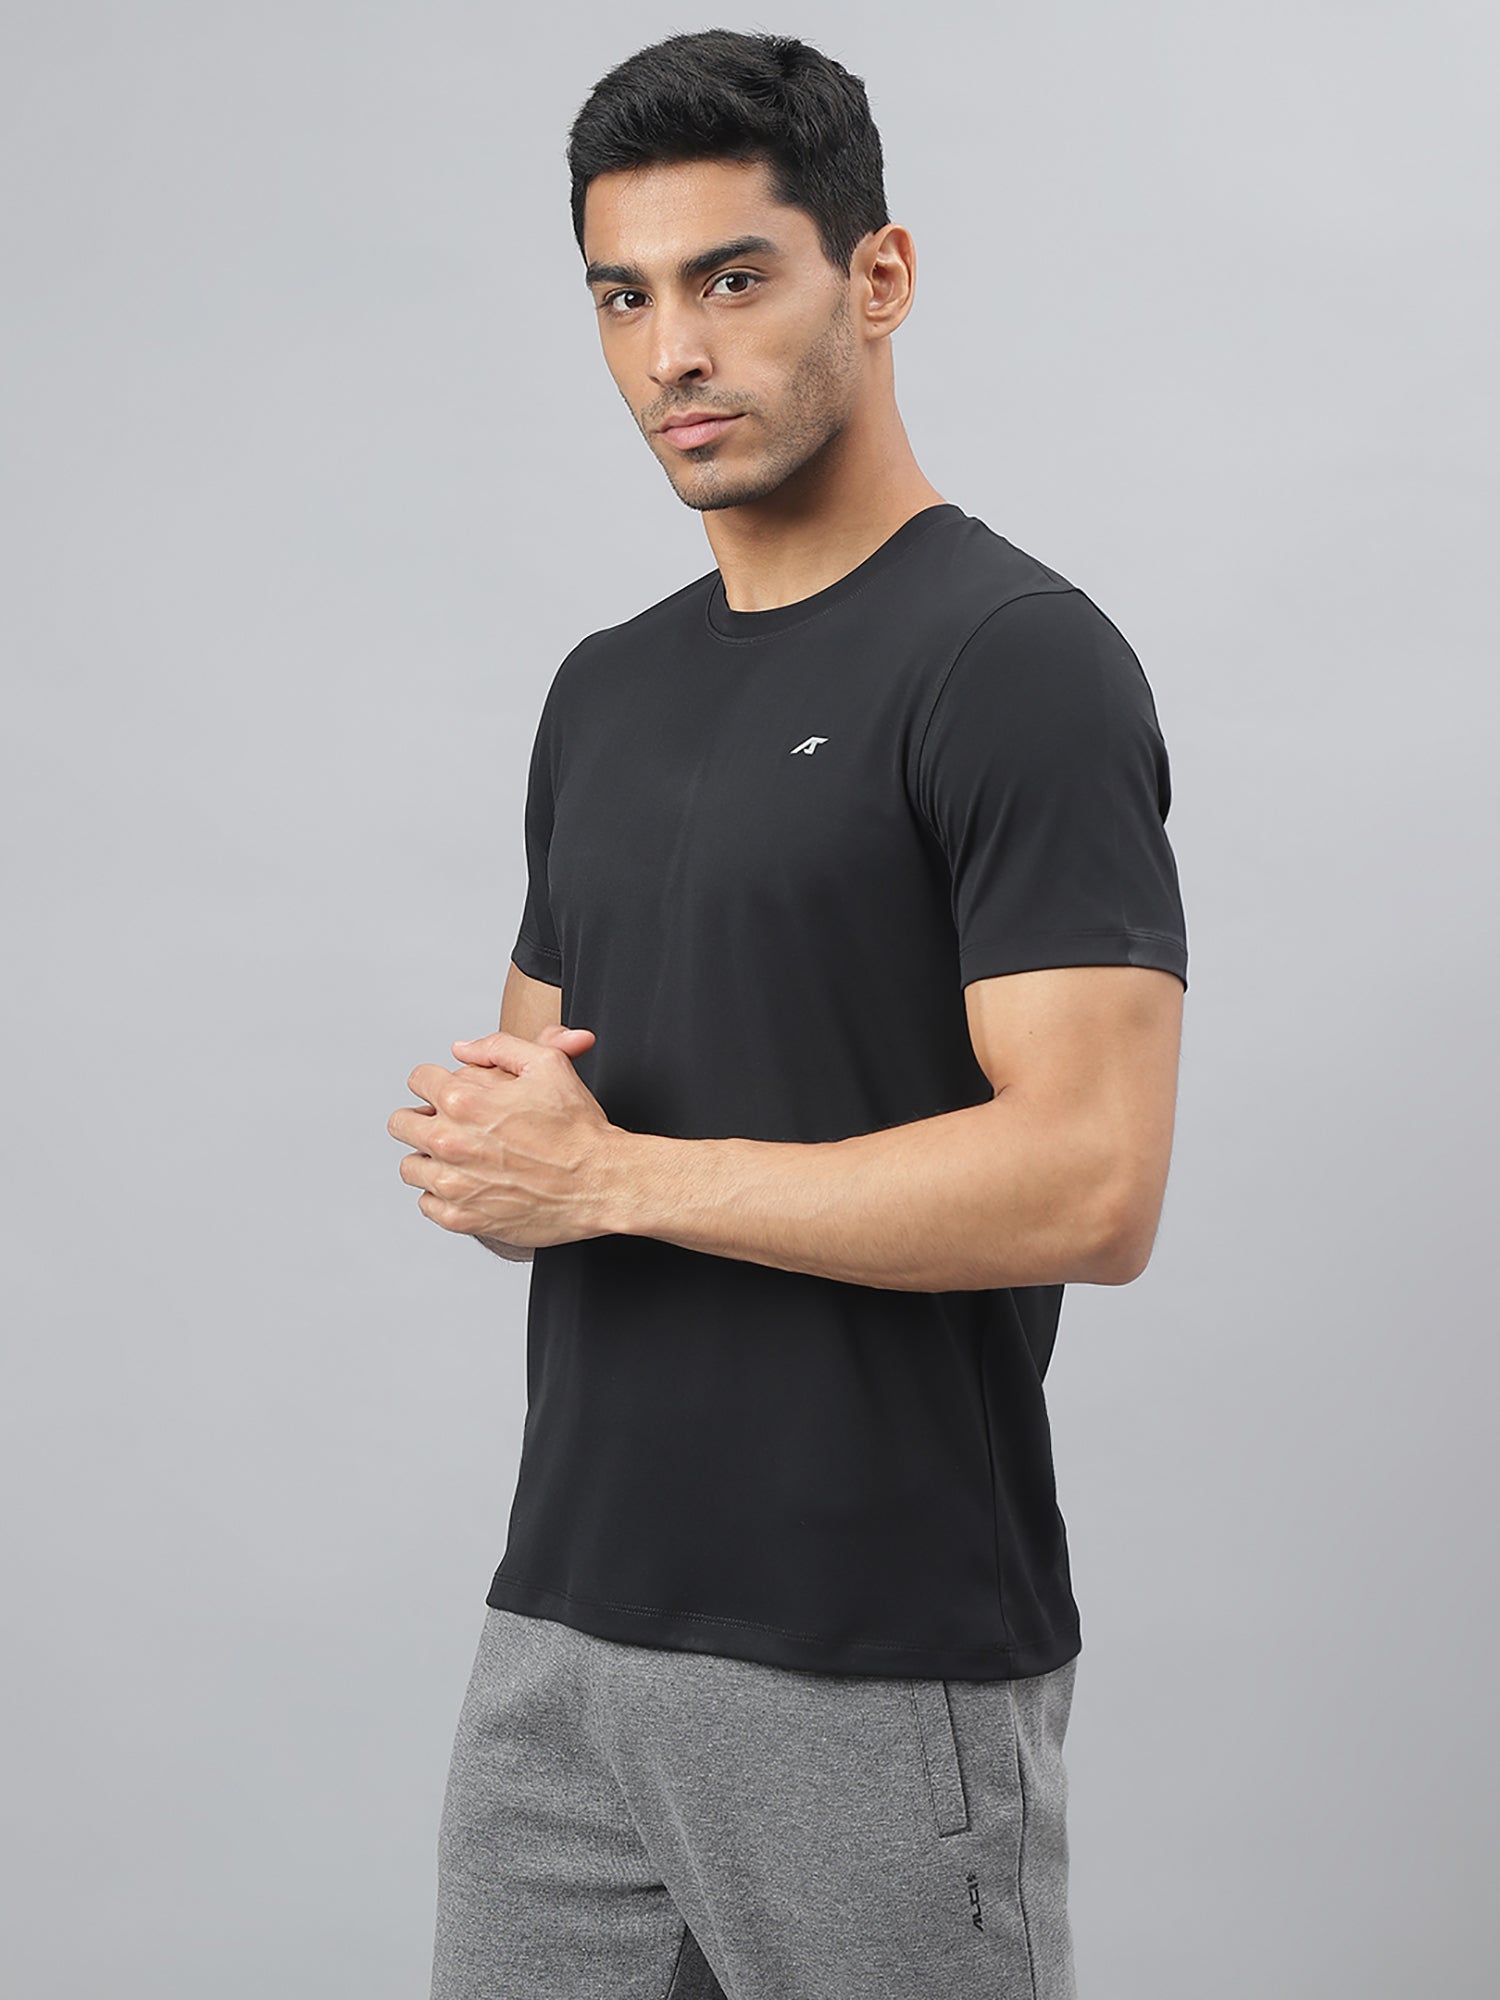 Alcis Men Black Anti-Static Soft-Touch Slim-Fit Sports for All Round Neck Wonder T-Shirt